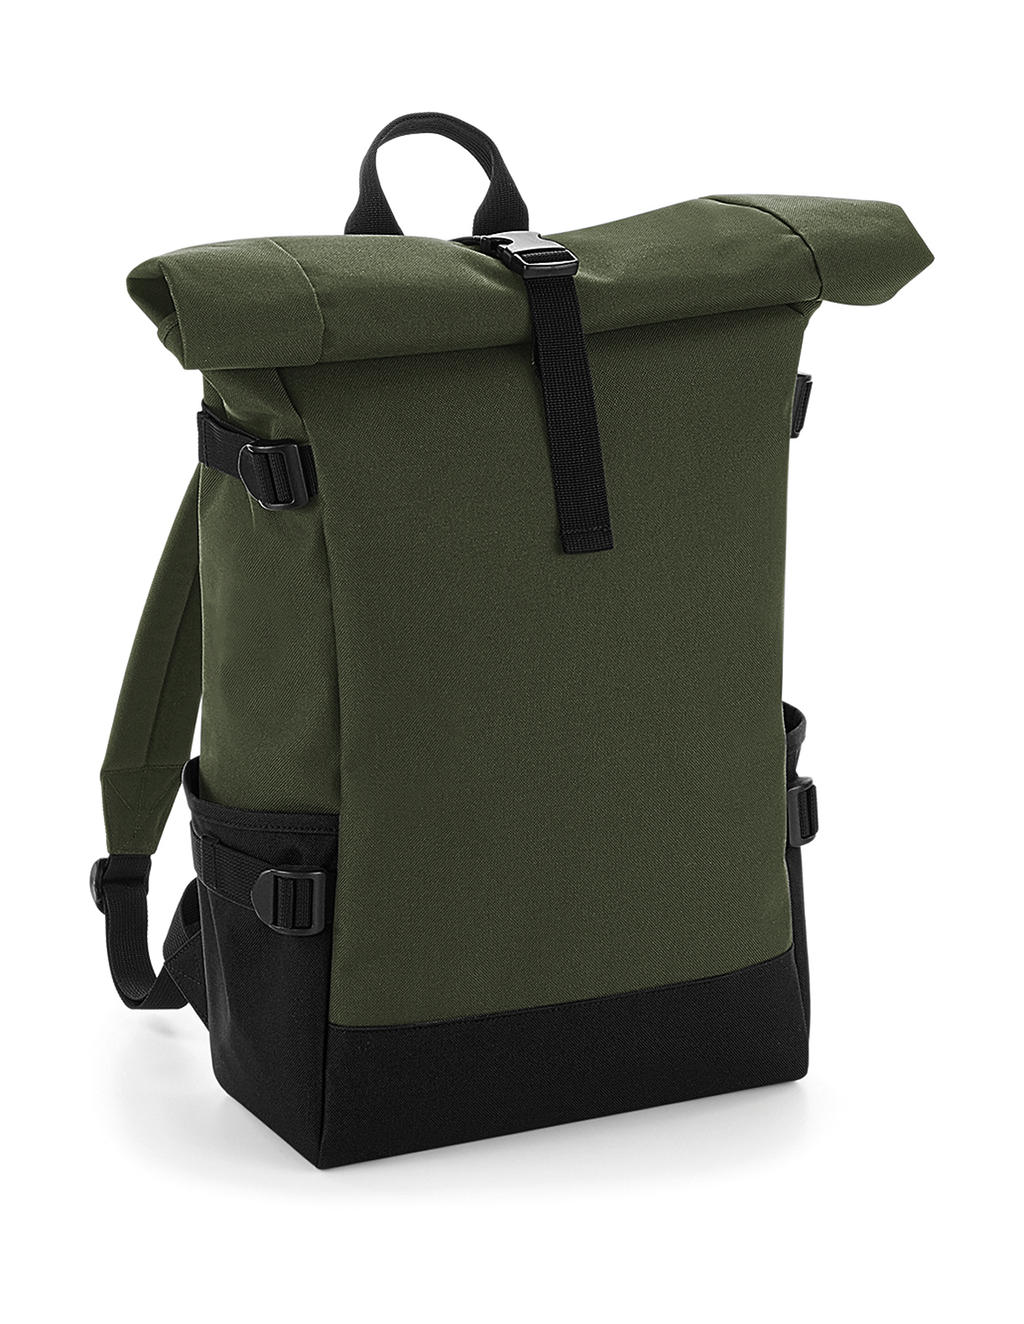  Block Roll-Top Backpack in Farbe Olive Green/Black